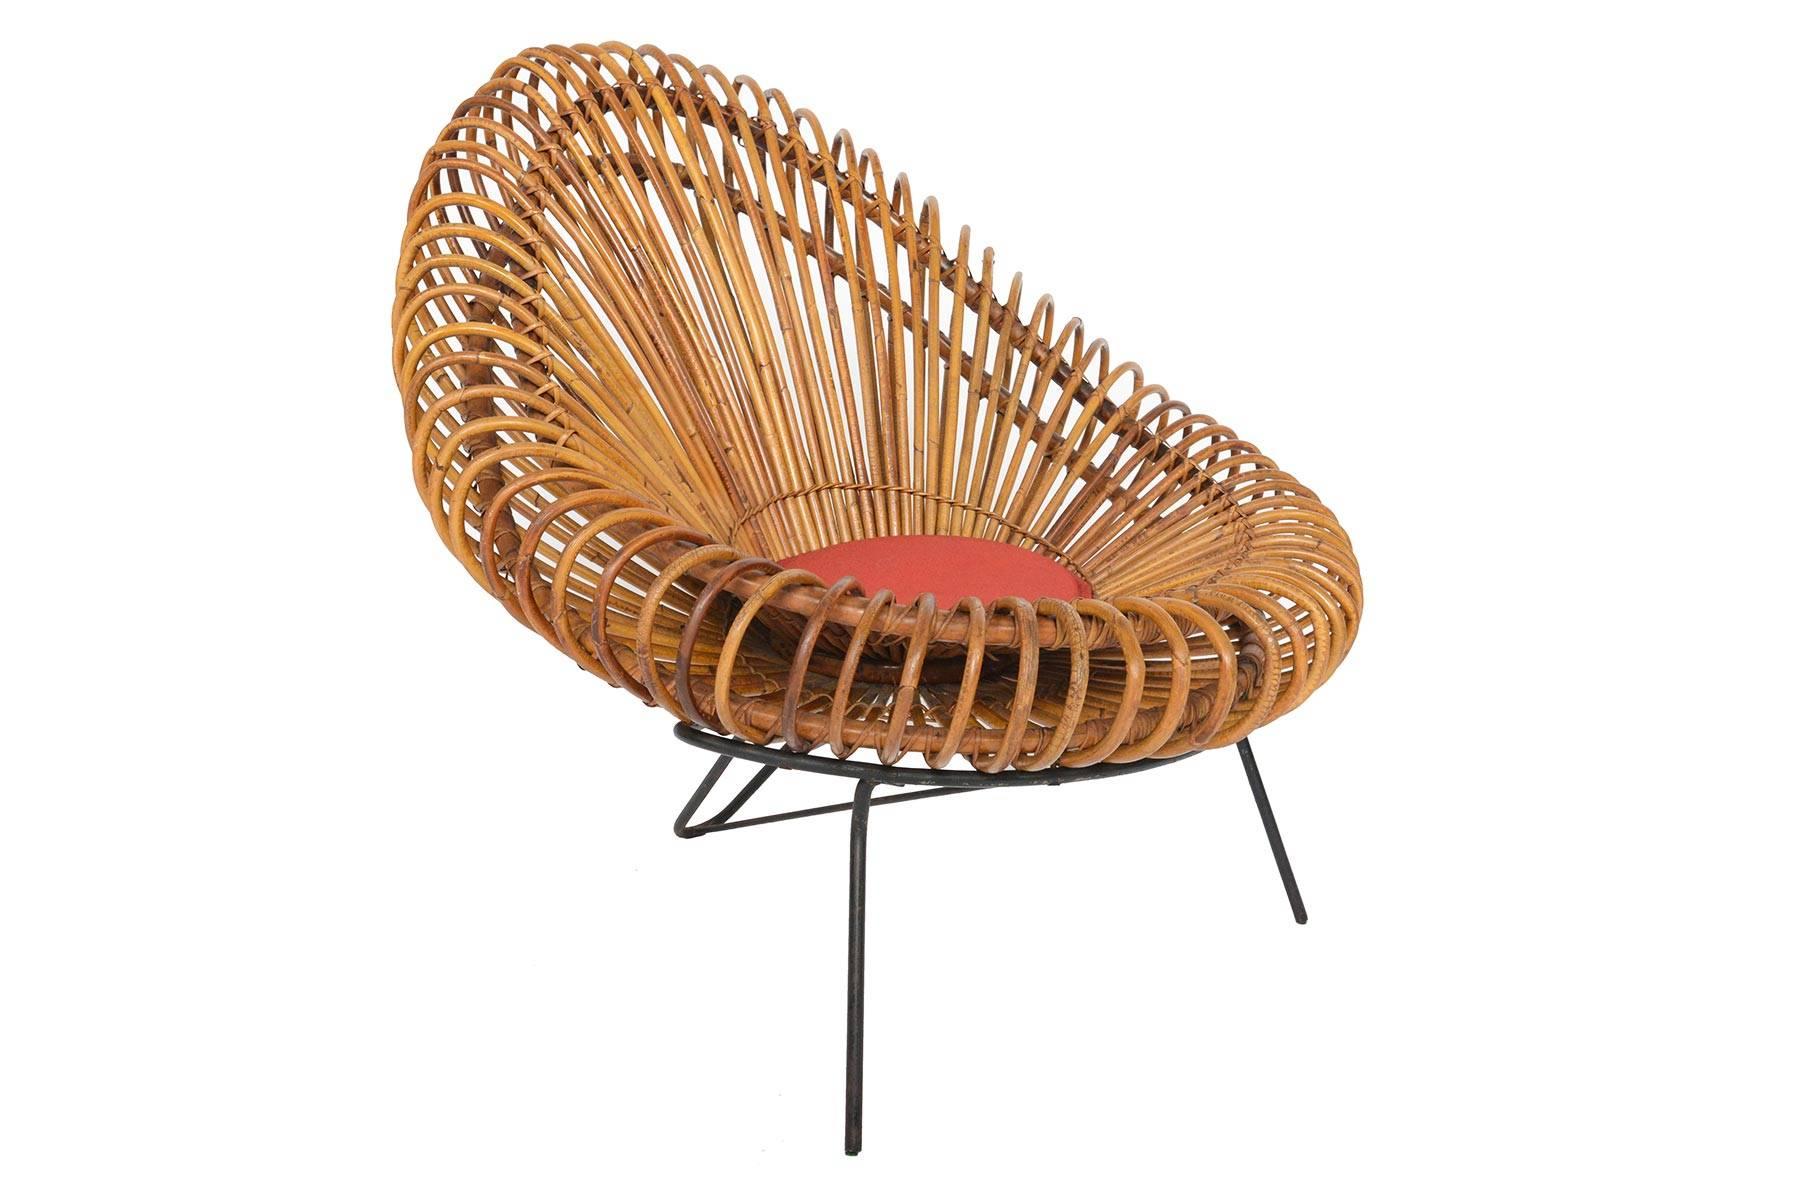 Rare and magnificent French modern basketware lounge chair designed by Janine Abraham & Dirk Jan Rol. Produced by edition Rougier in 1955. In excellent original condition.
  